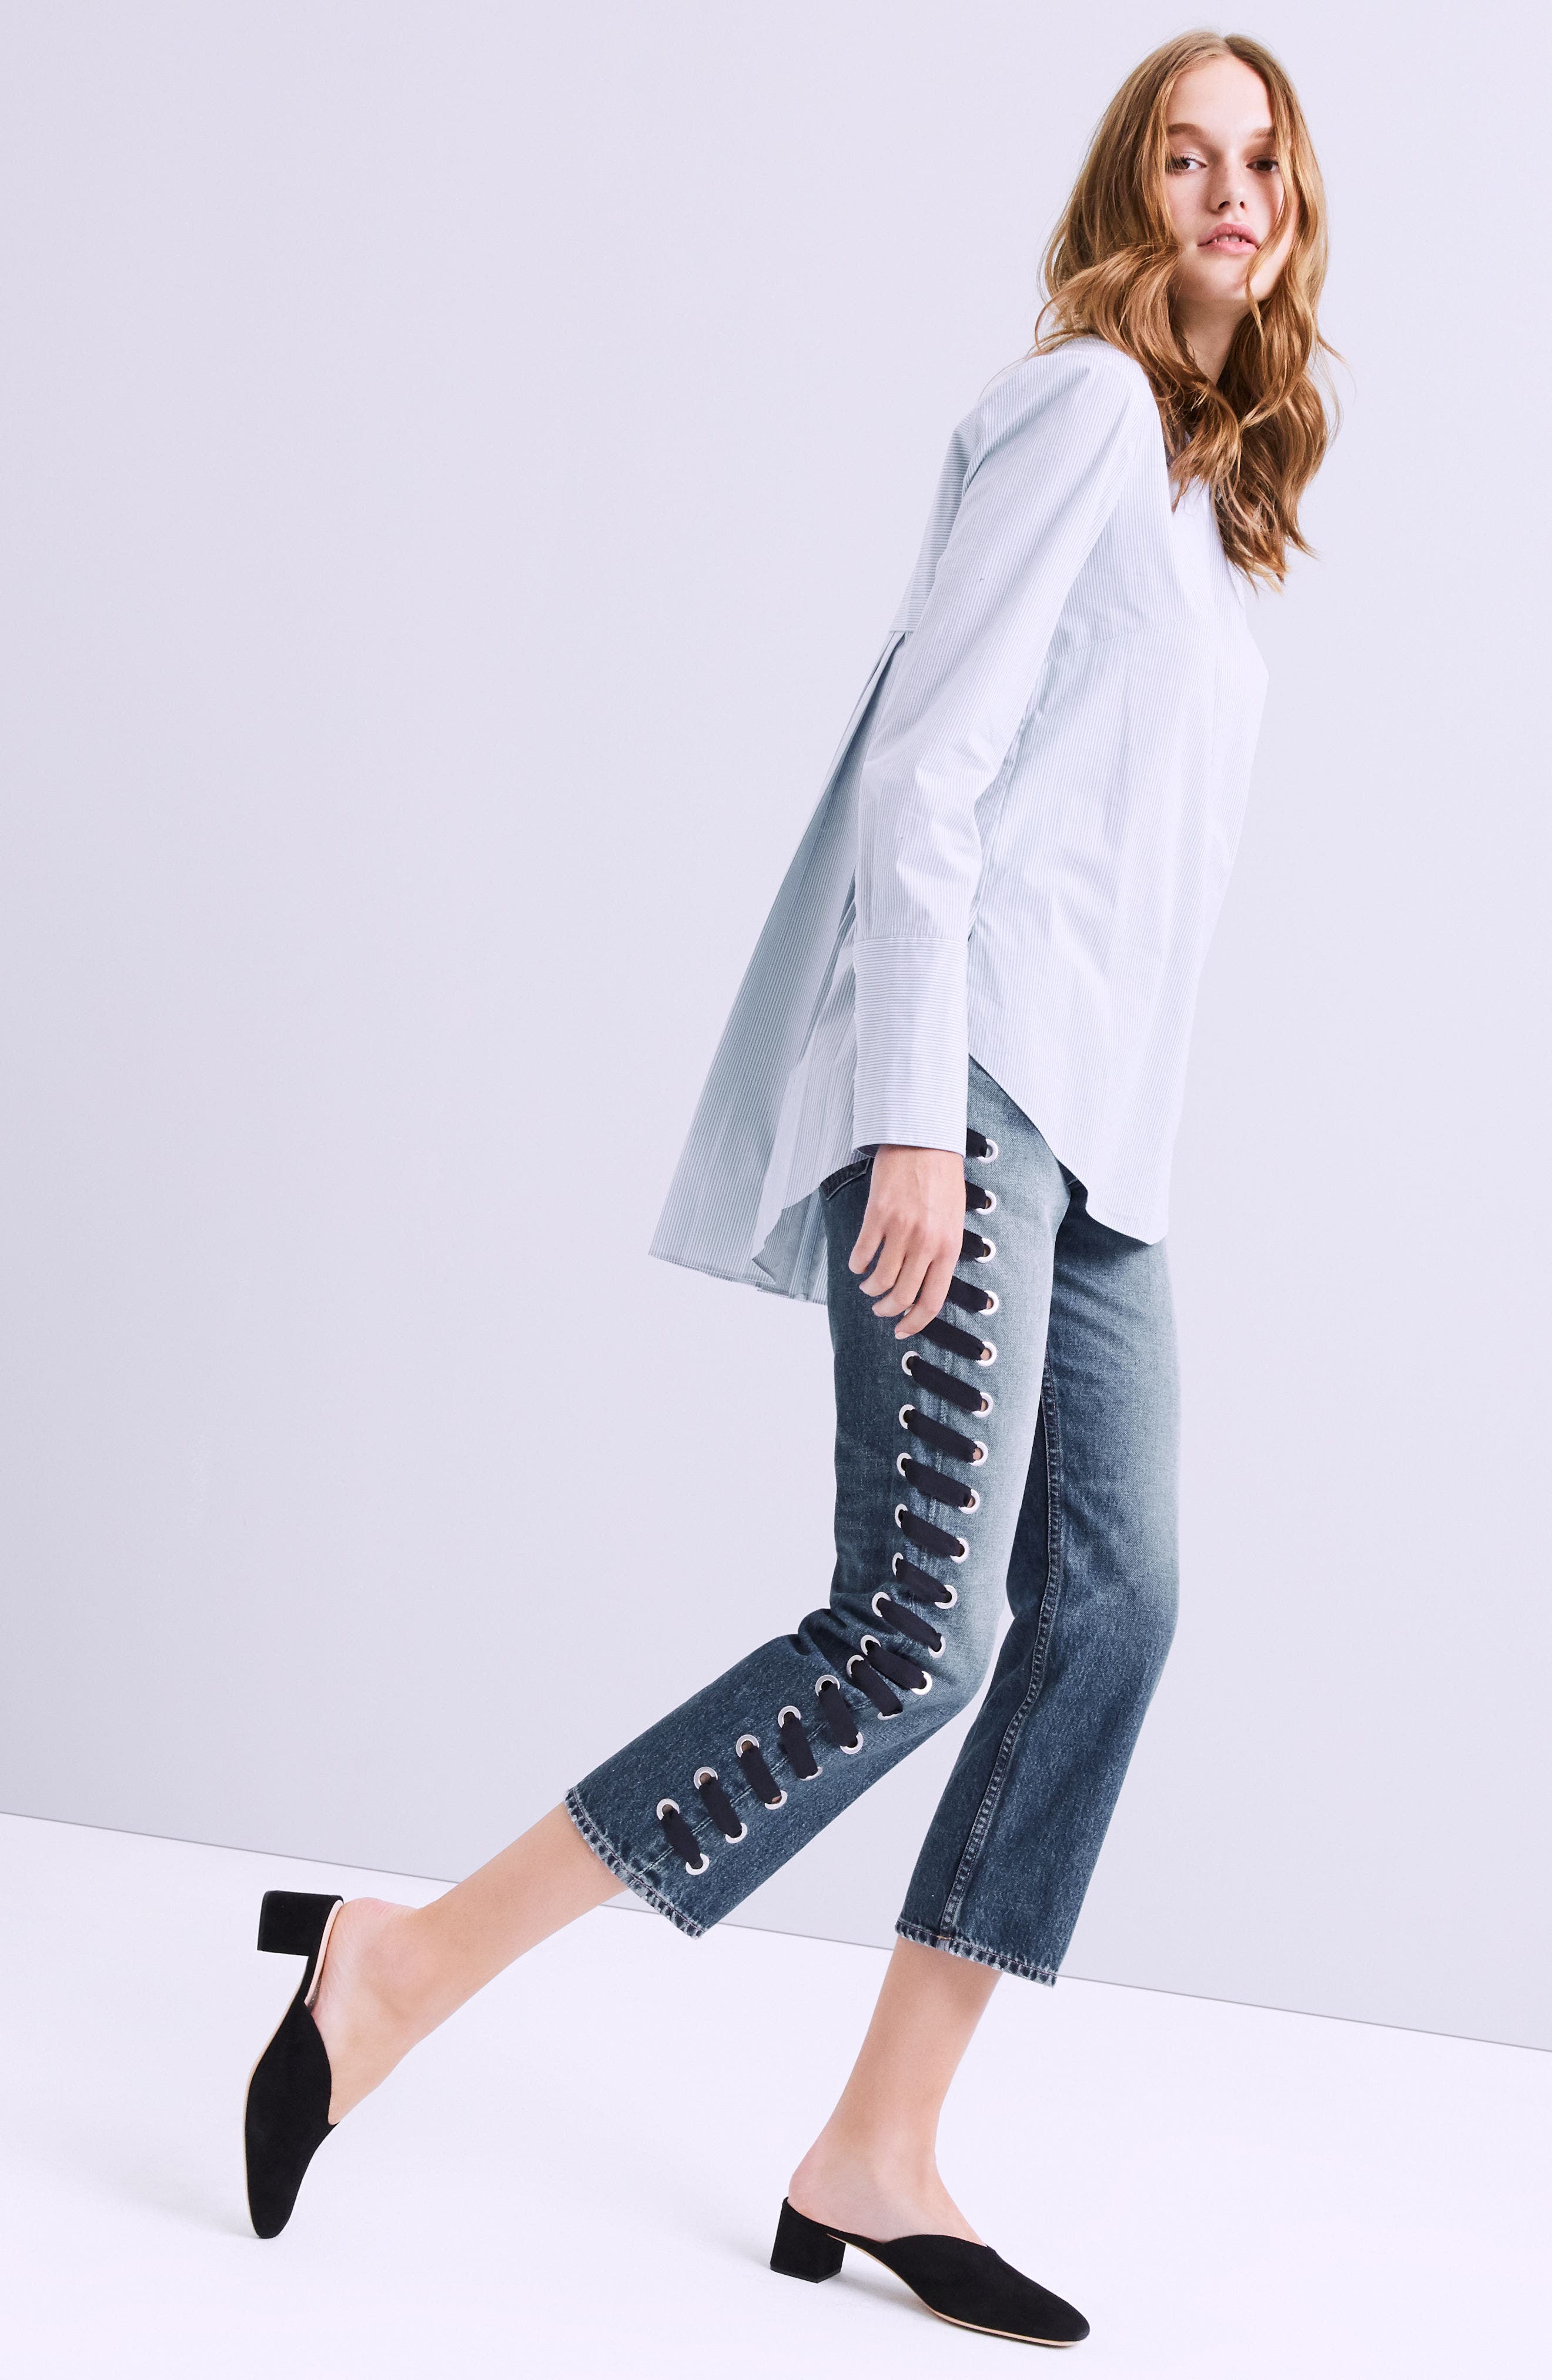 veronica beard lace up jeans